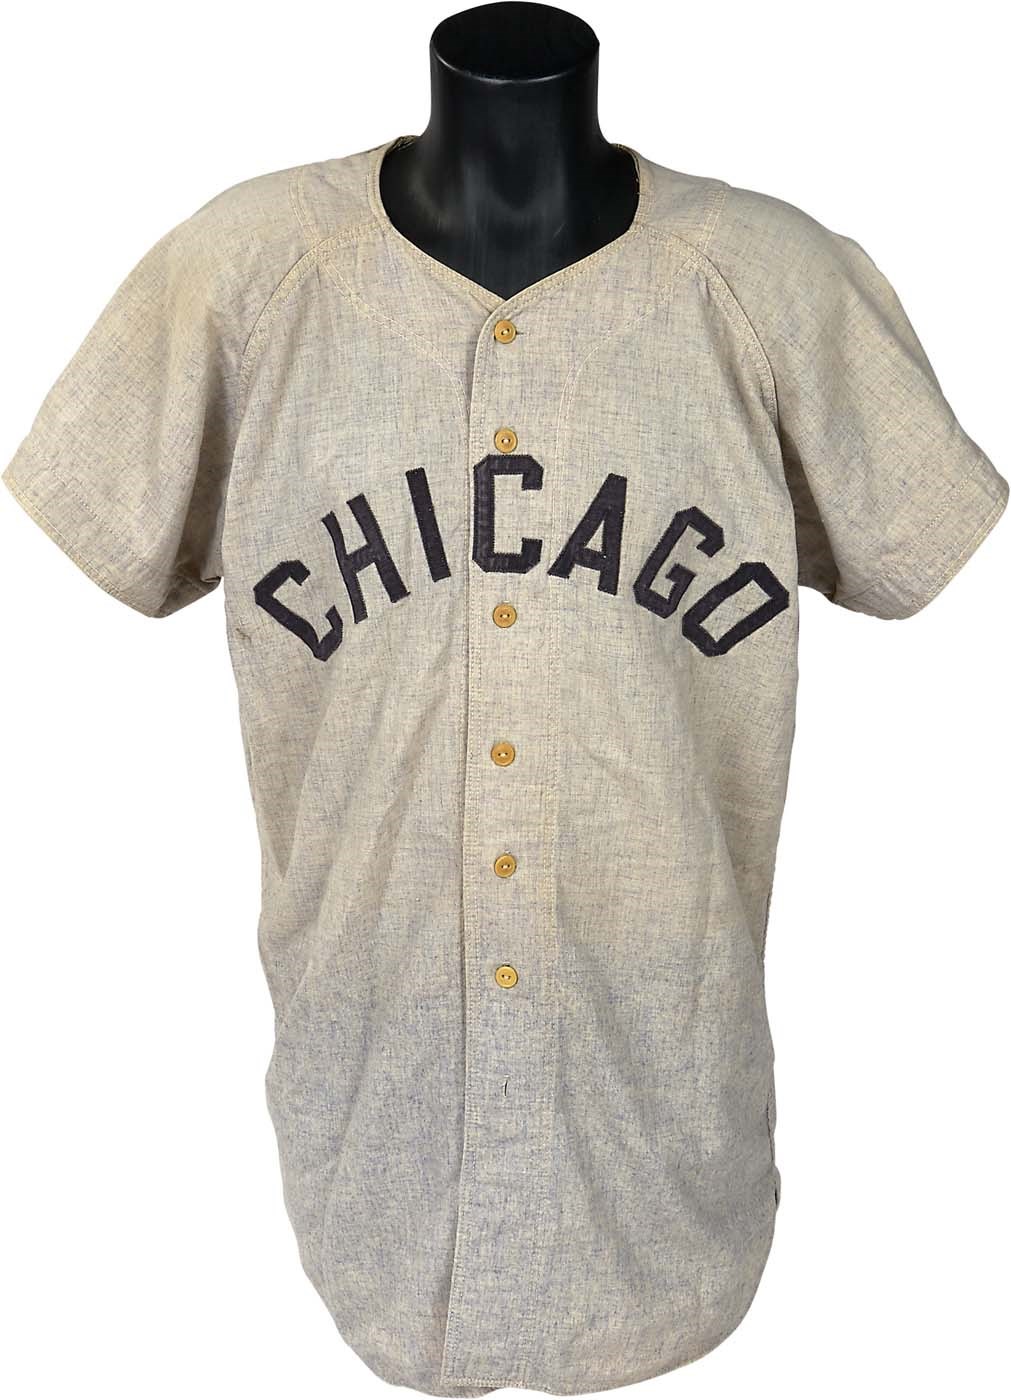 - 1957 Chicago White Sox #21 Jerry Staley Game Worn Jersey